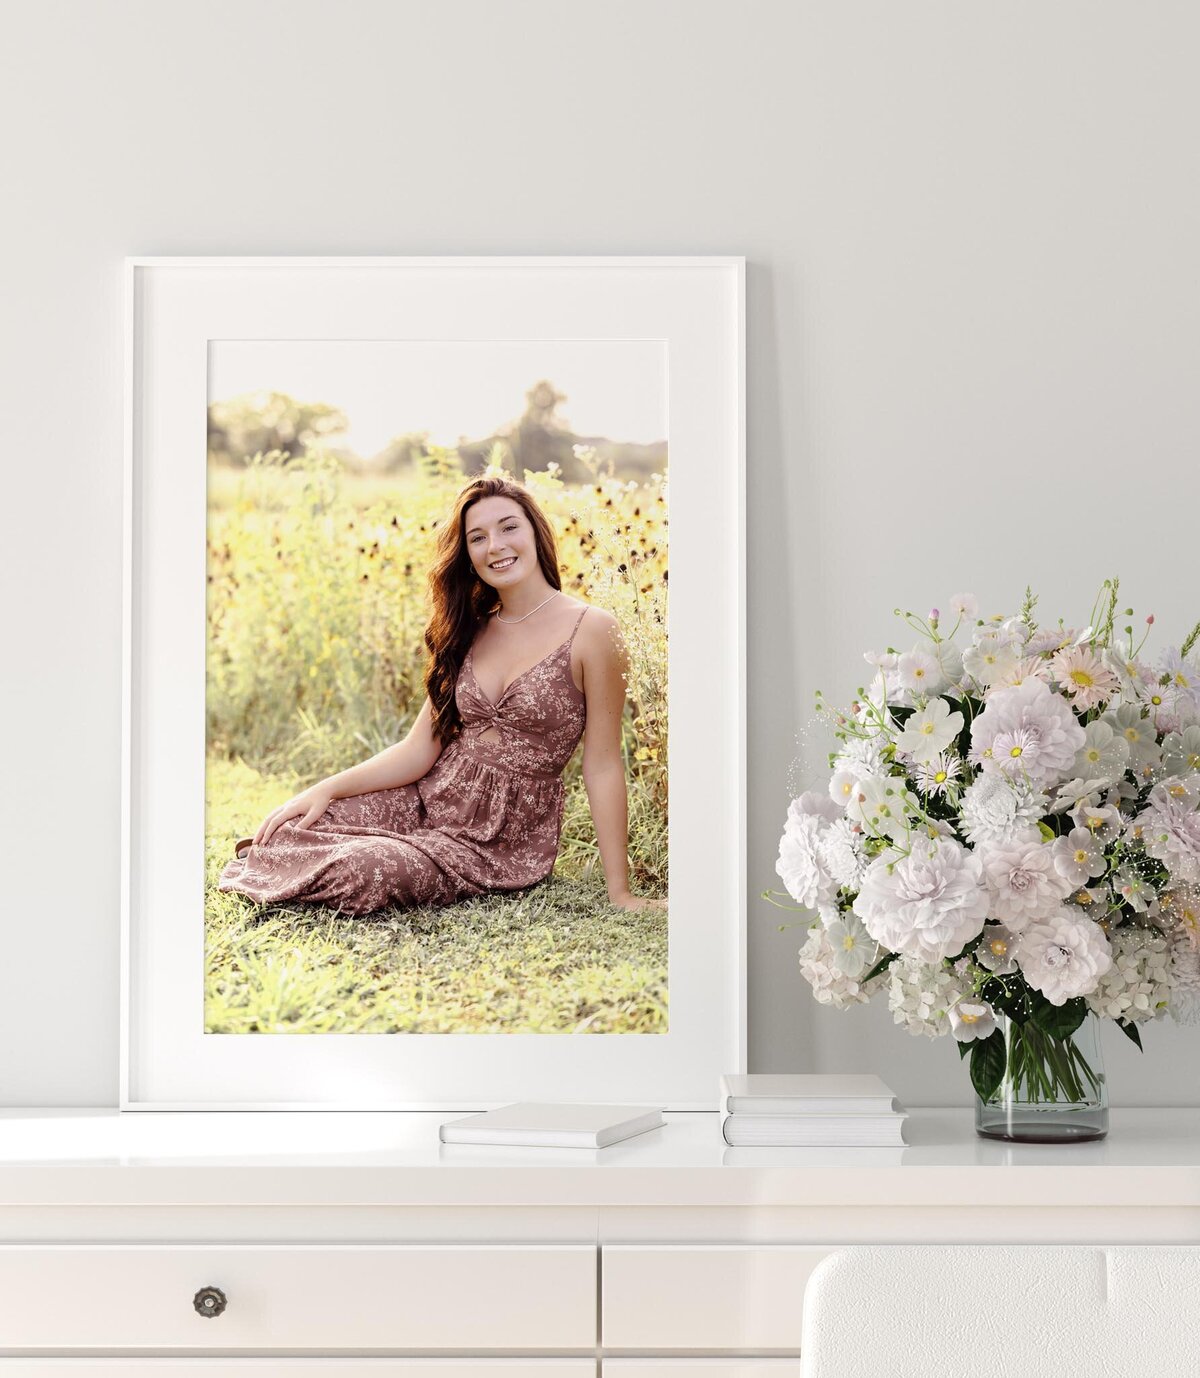 A mock up of a printed senior portrait in a white frame. The photo features a high school senior in a long floral dress, sitting in front of some yellow flowers.